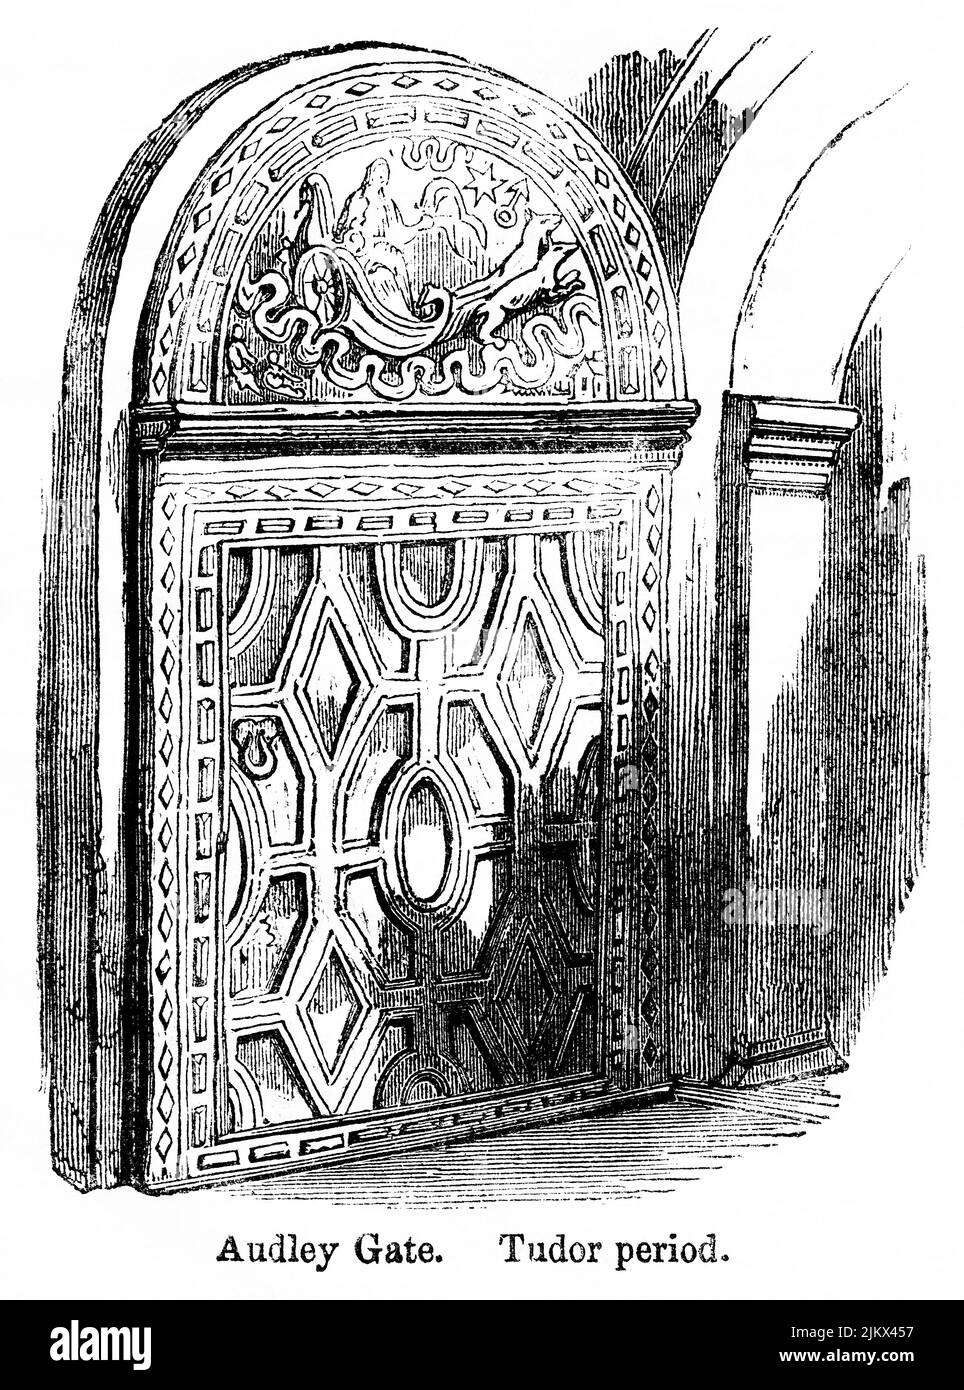 Audley Gate, Tudor Period, Illustration from the Book, 'John Cassel’s Illustrated History of England, Volume II', text by William Howitt, Cassell, Petter, and Galpin, London, 1858 Stock Photo